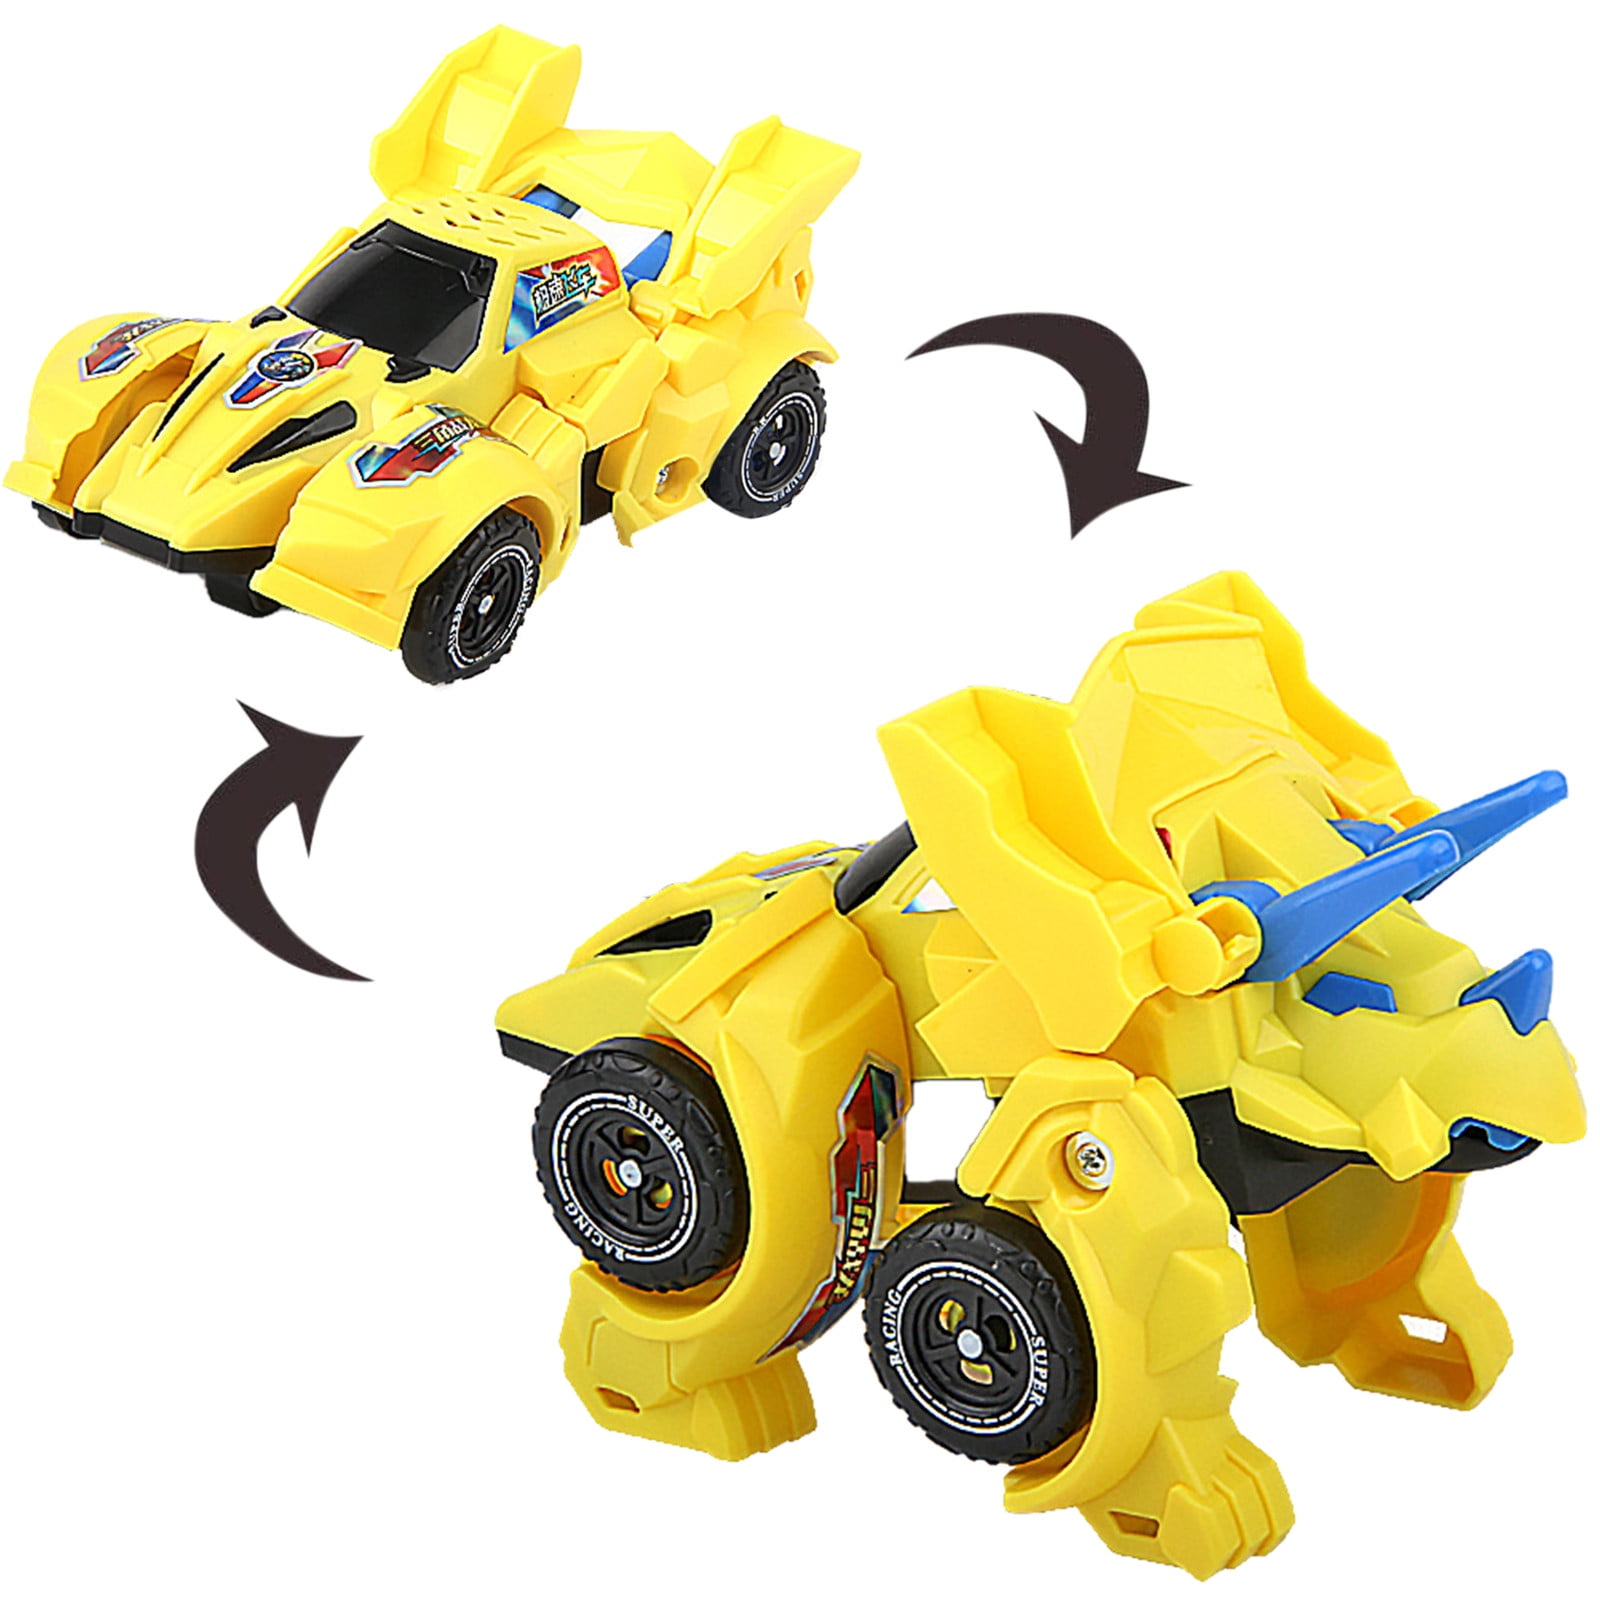 Details about   Toy Dinosaur Car Automatic Transformer Dino Cars Music LED Light Kids Toys Gift 